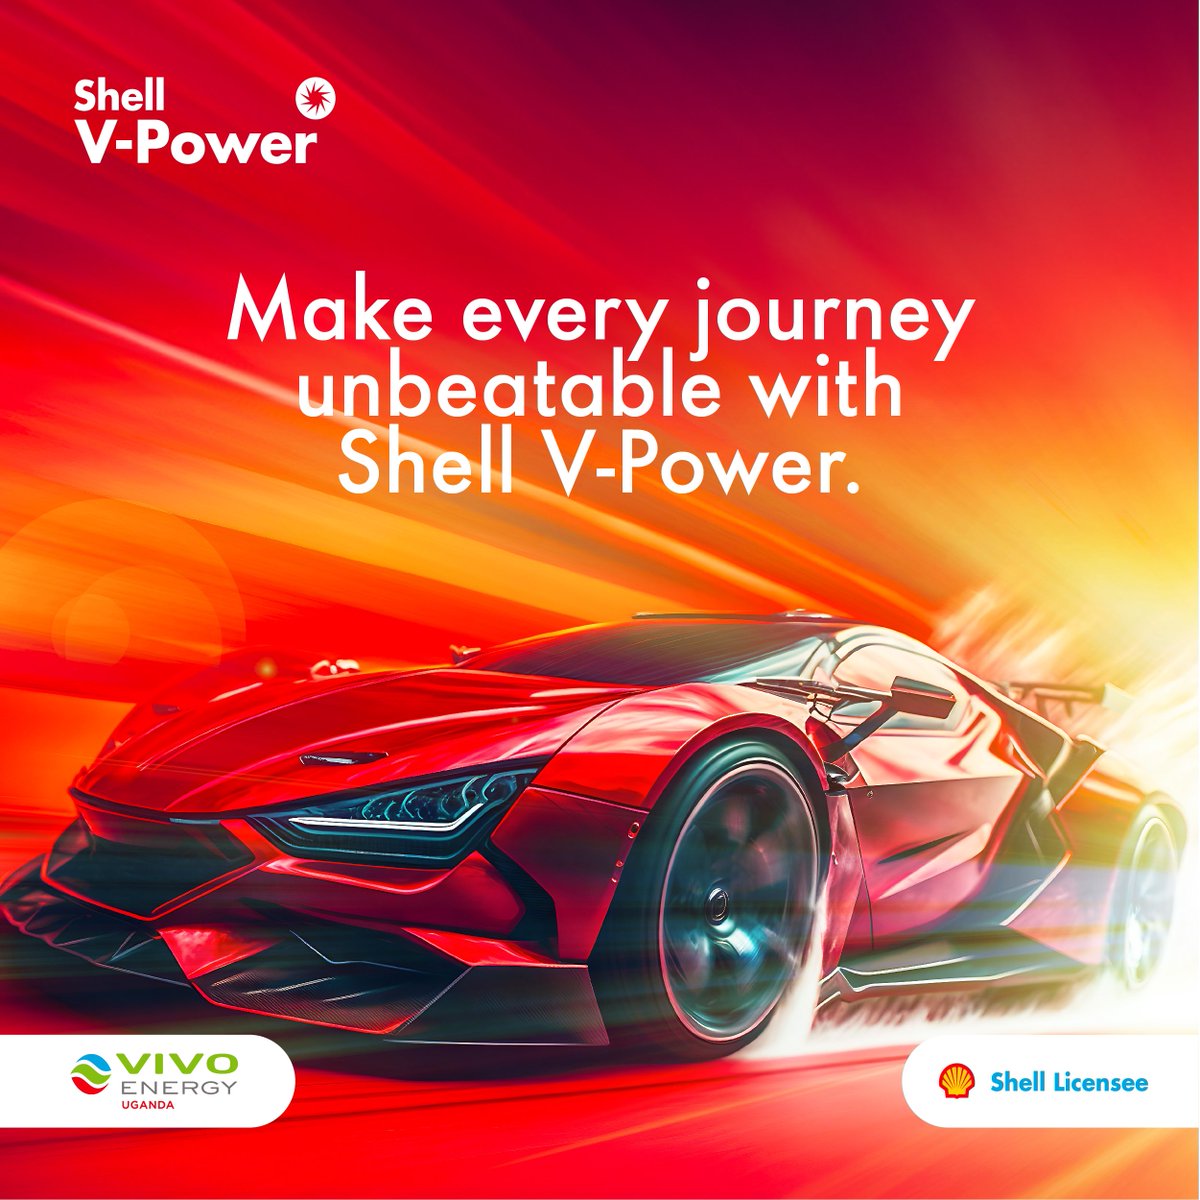 Are you embarking on a journey to the countryside? Fuel with Shell V-Power for unbeatable engine efficiency and performance. Make your journey as memorable as possible with fuel that brings the best out of your car. #VivoEnergyUganda